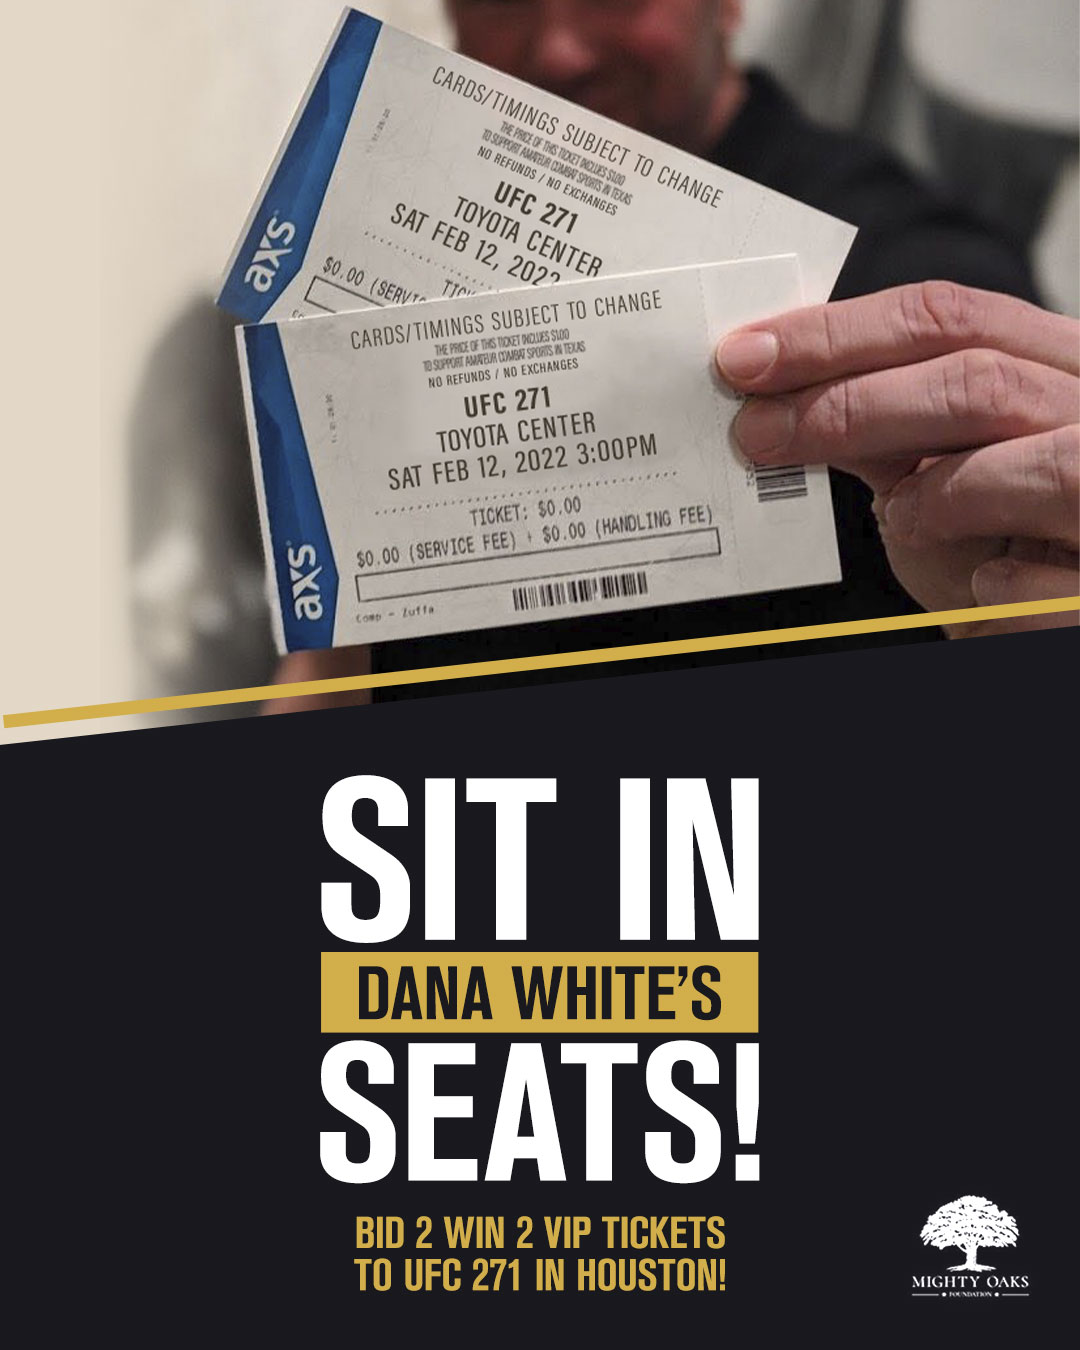 Ufc Bid 2 Win 2 Vip Tickets To Sit In Dana White S Personal Section For Ufc271 In Houston All Net Proceeds Will Benefit Mightyoaksfdn Ufc271 Enter Here